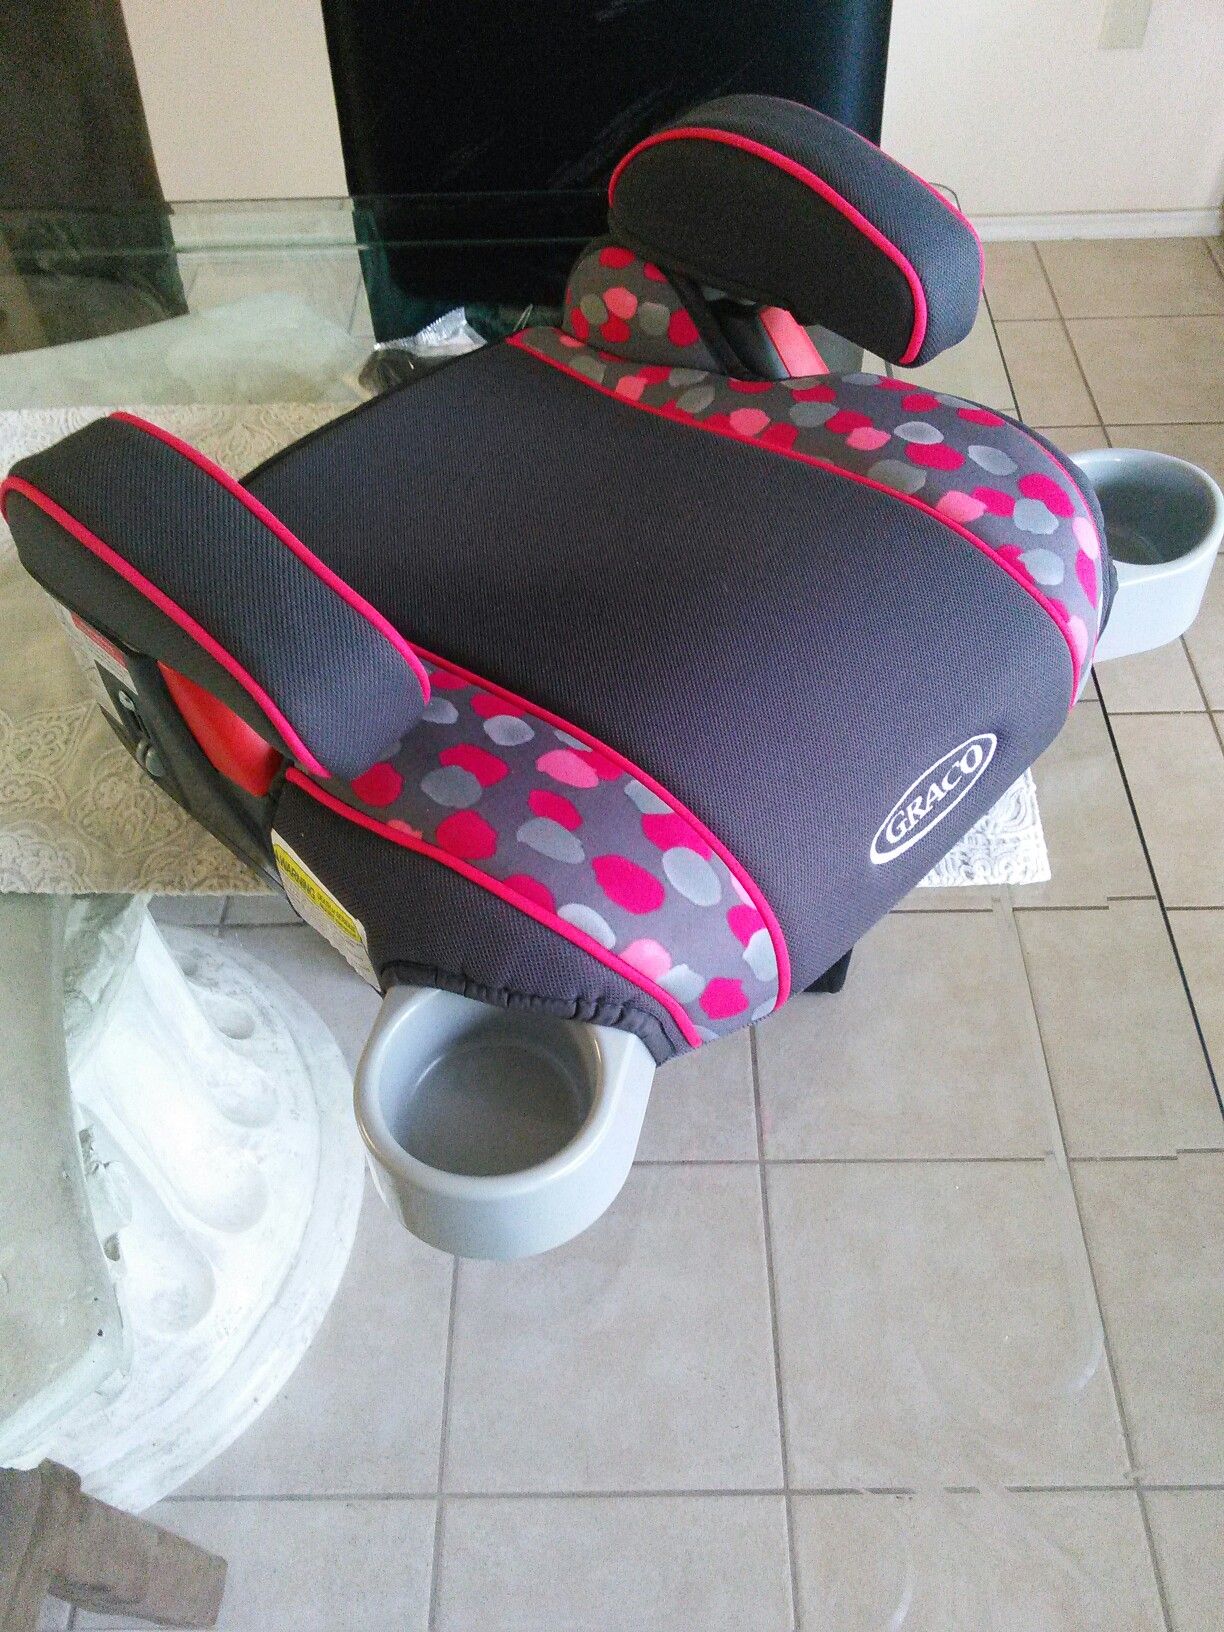 Graco child booster seat